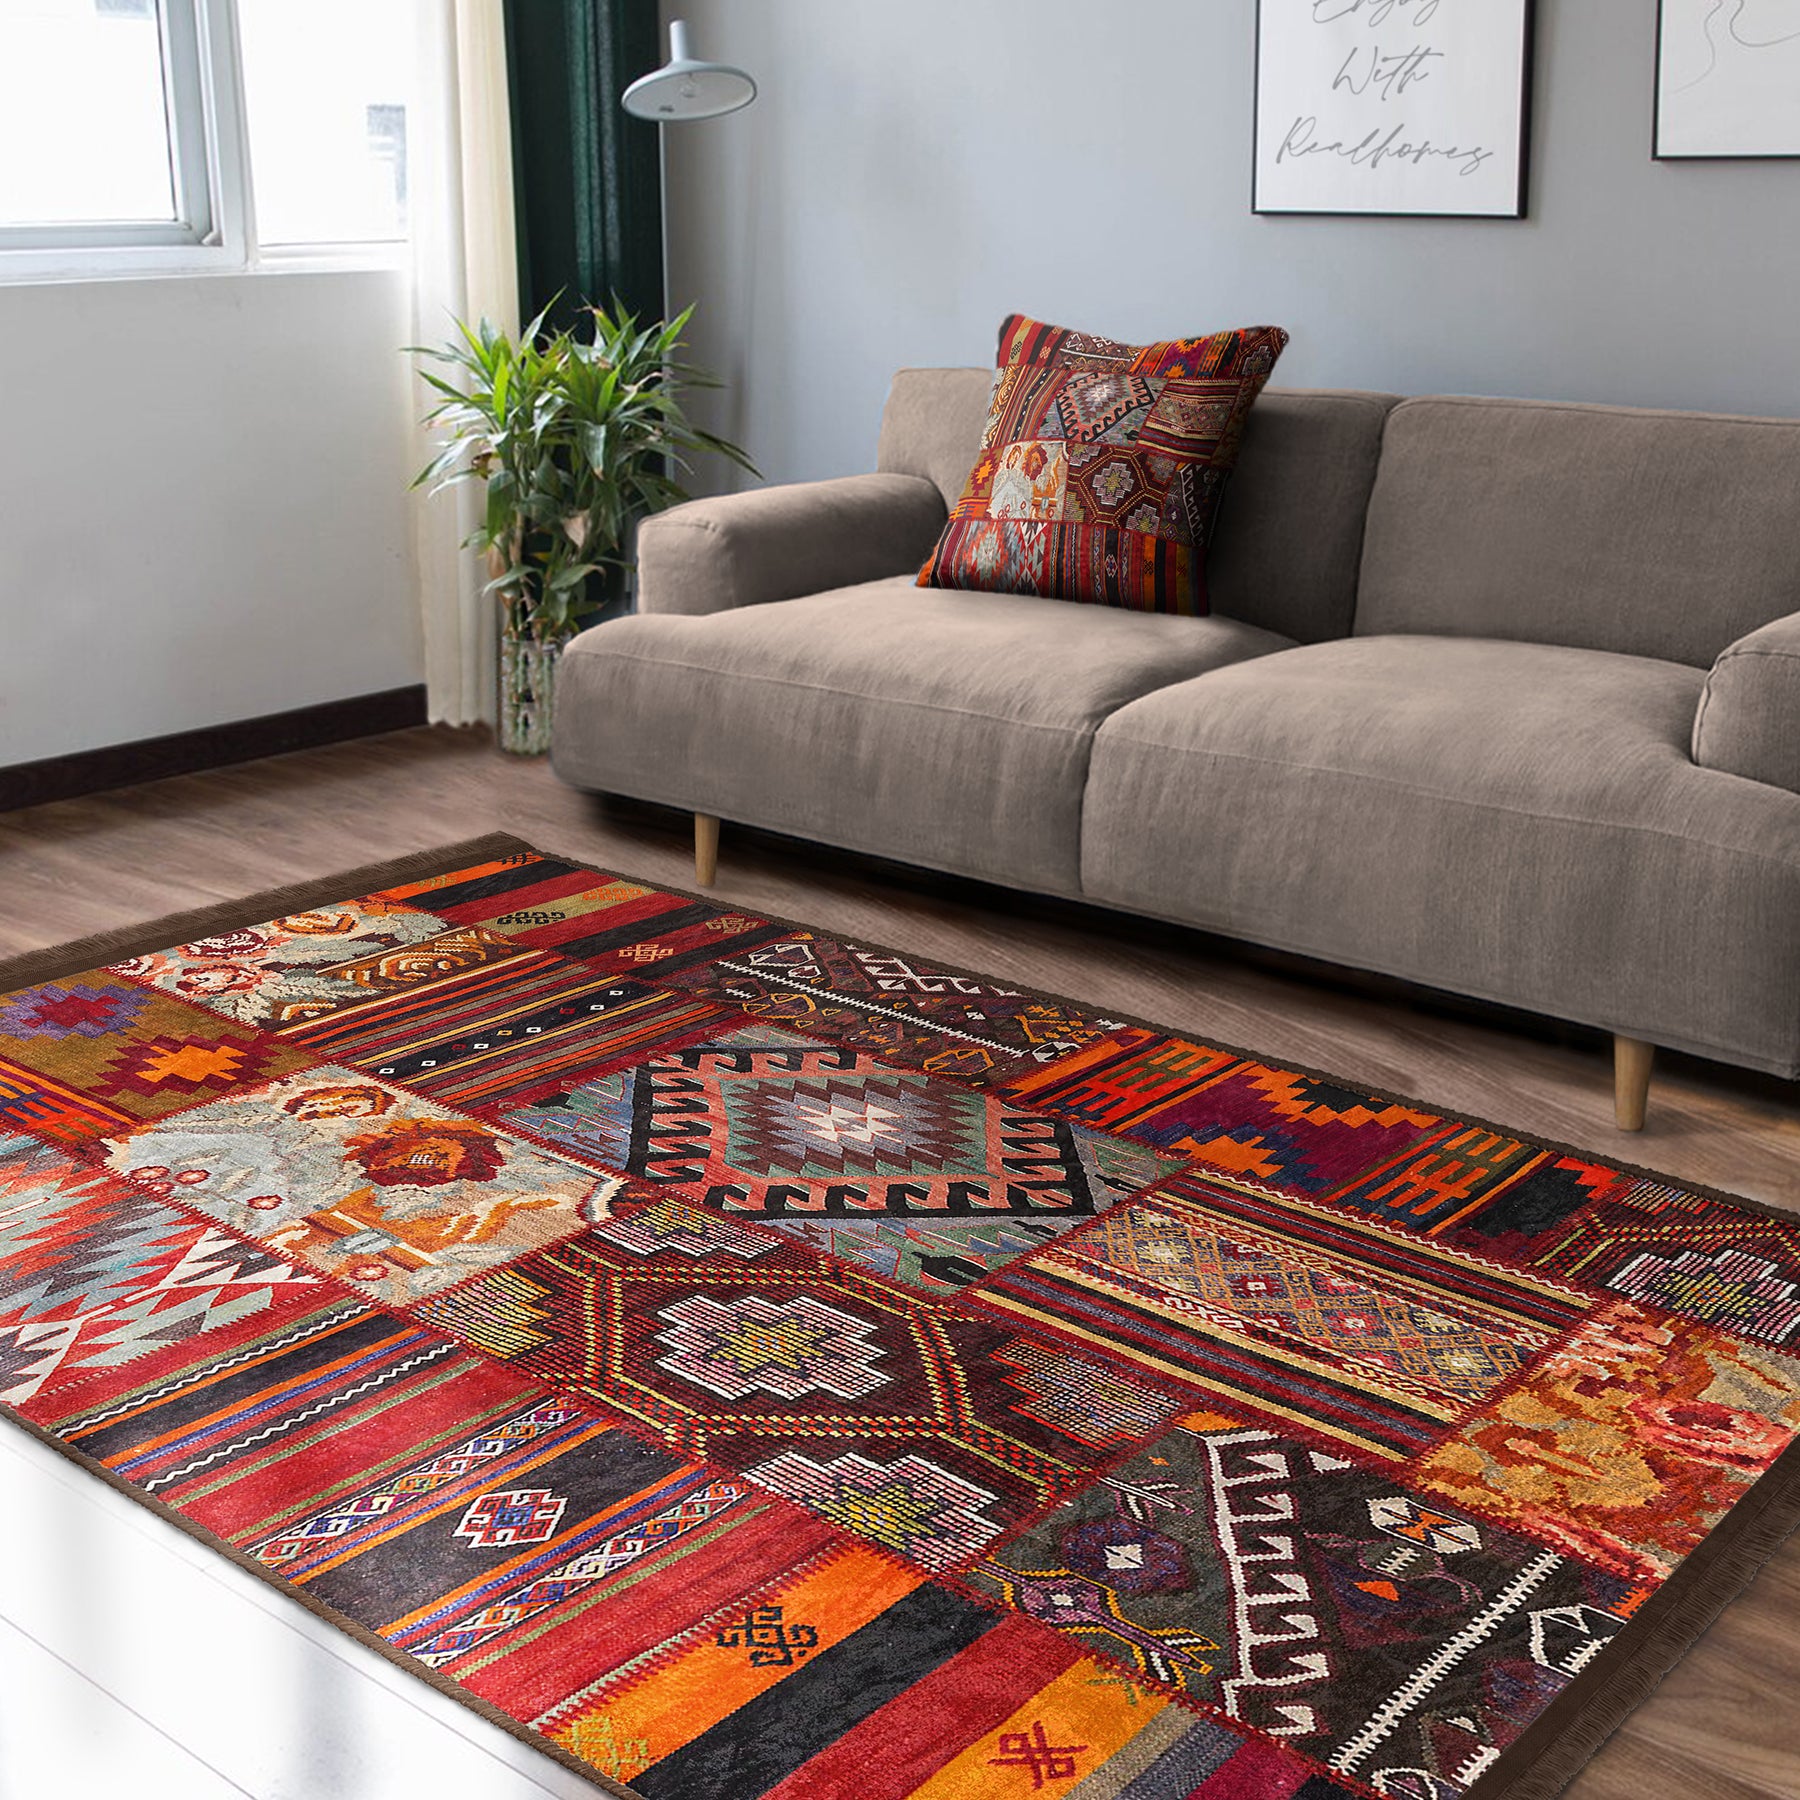 Ethnic Patterned Area Rug for a Touch of Heritage